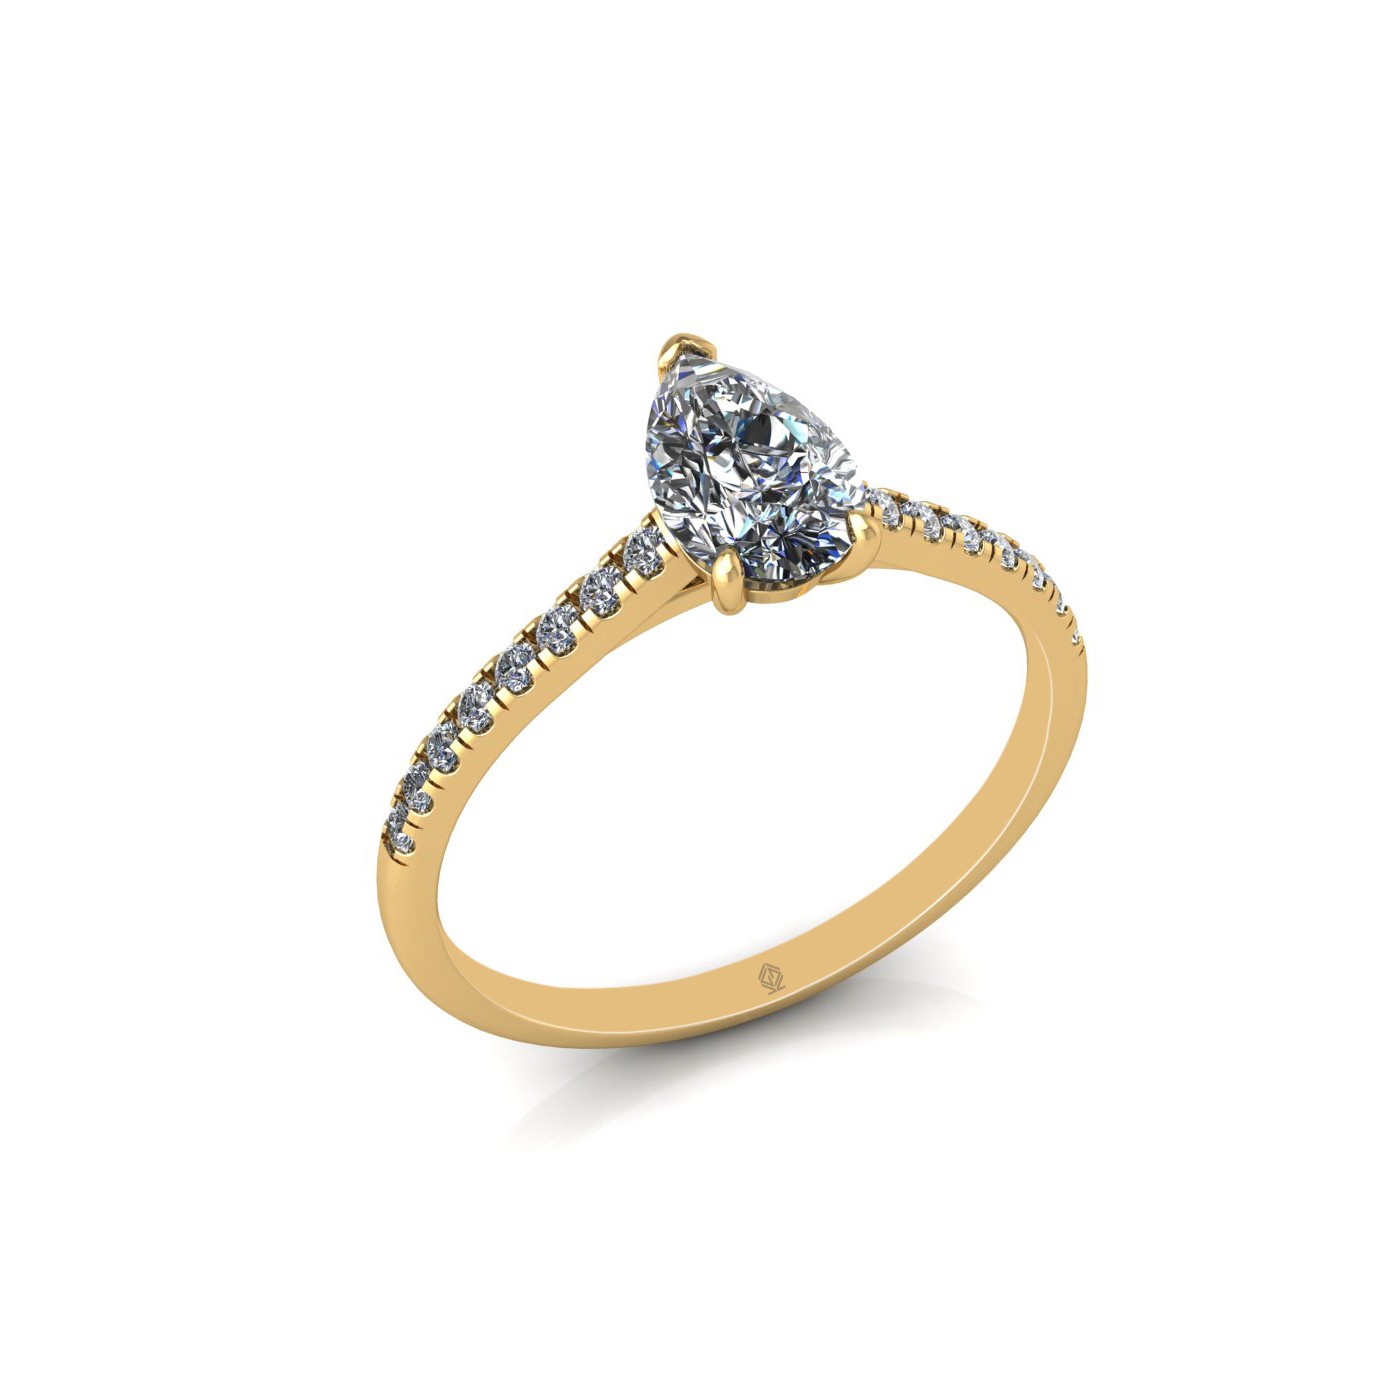 18k yellow gold 0,80 ct 3 prongs pear diamond engagement ring with whisper thin pavÉ set band